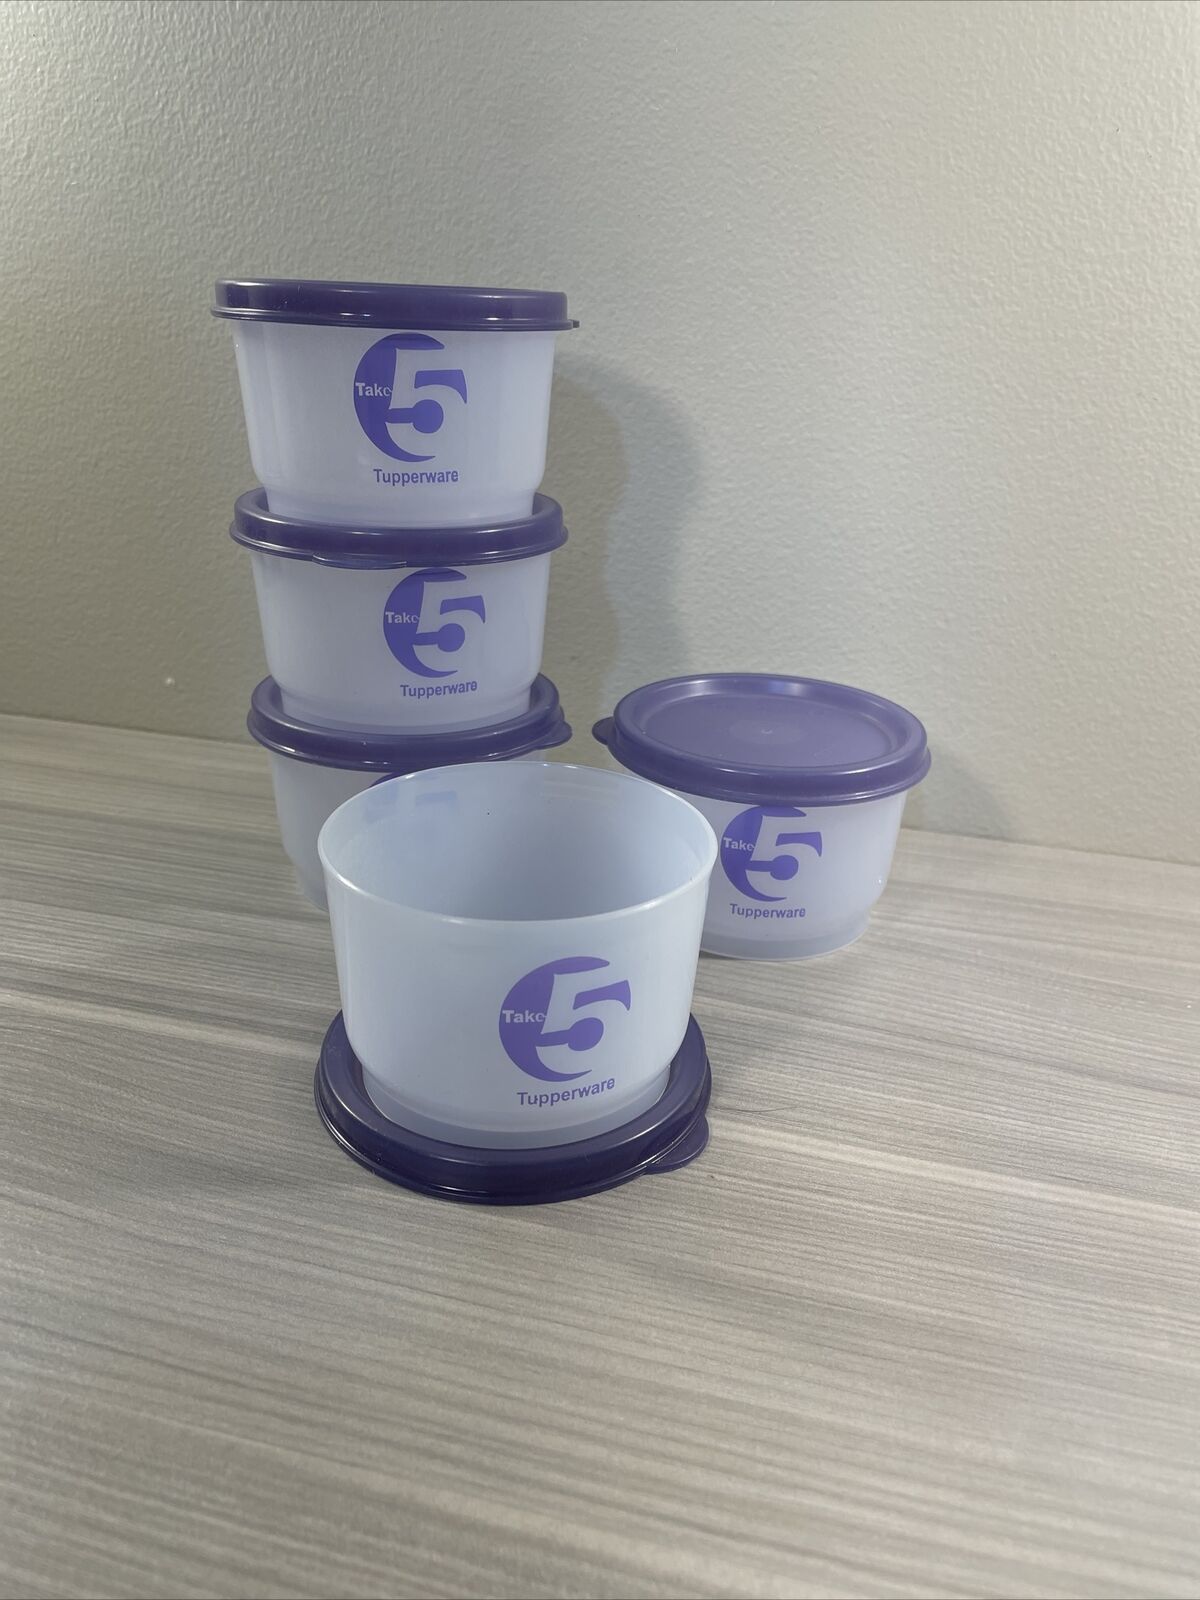 Tupperware Snack Cups Set of 5 Purple Seals 4 oz. Containers Take-5 Logo New